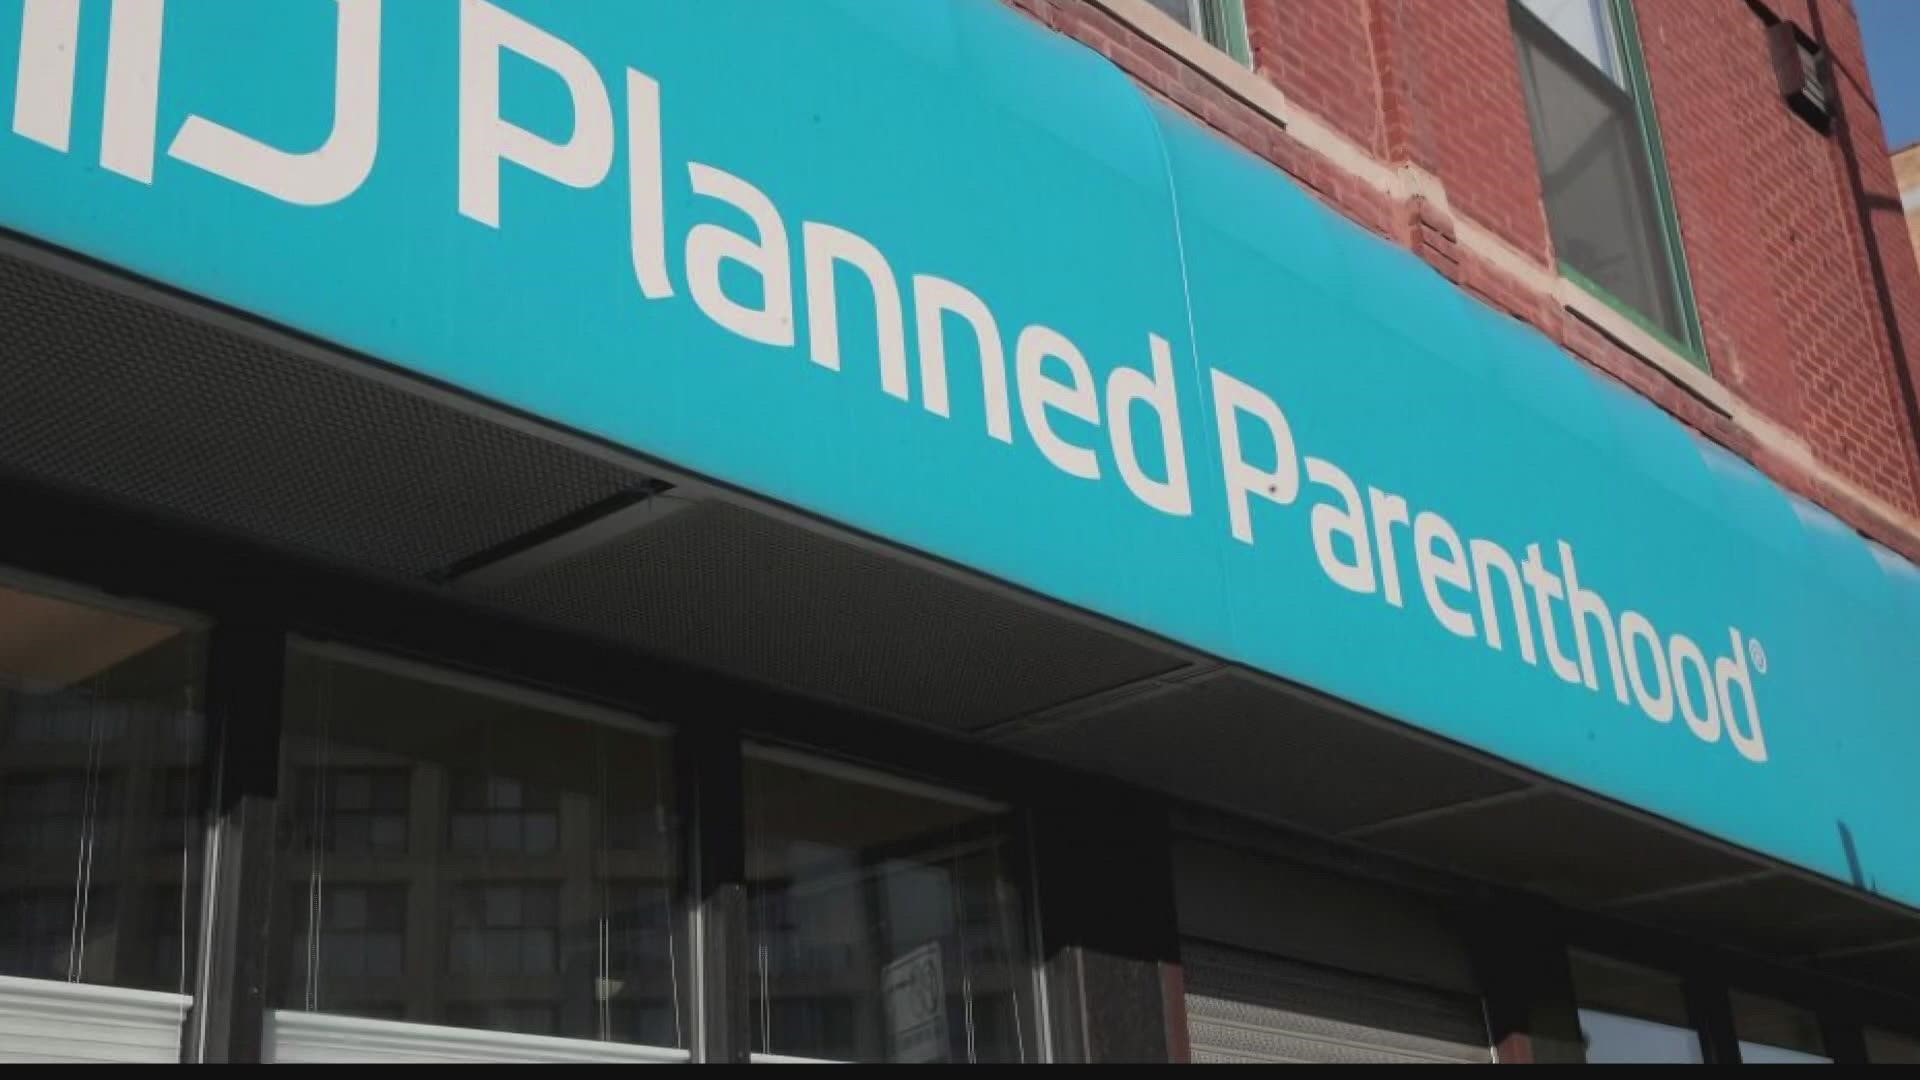 Karen Campbell has the latest on what Hoosiers need to know about the fate of abortion clinics in the state.